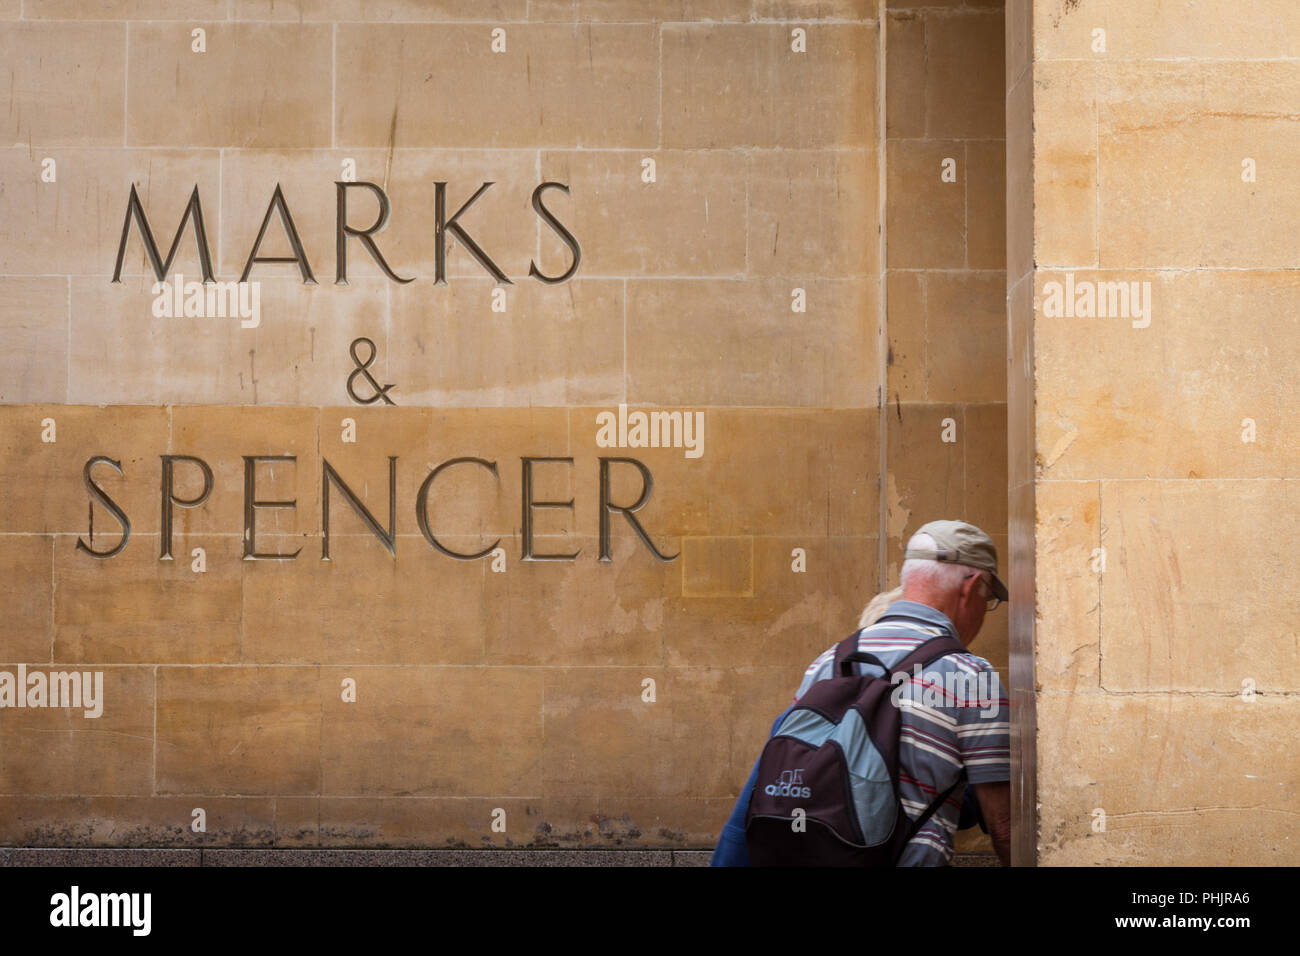 Marks and Spencer shop entrance in Bath, UK Stock Photo